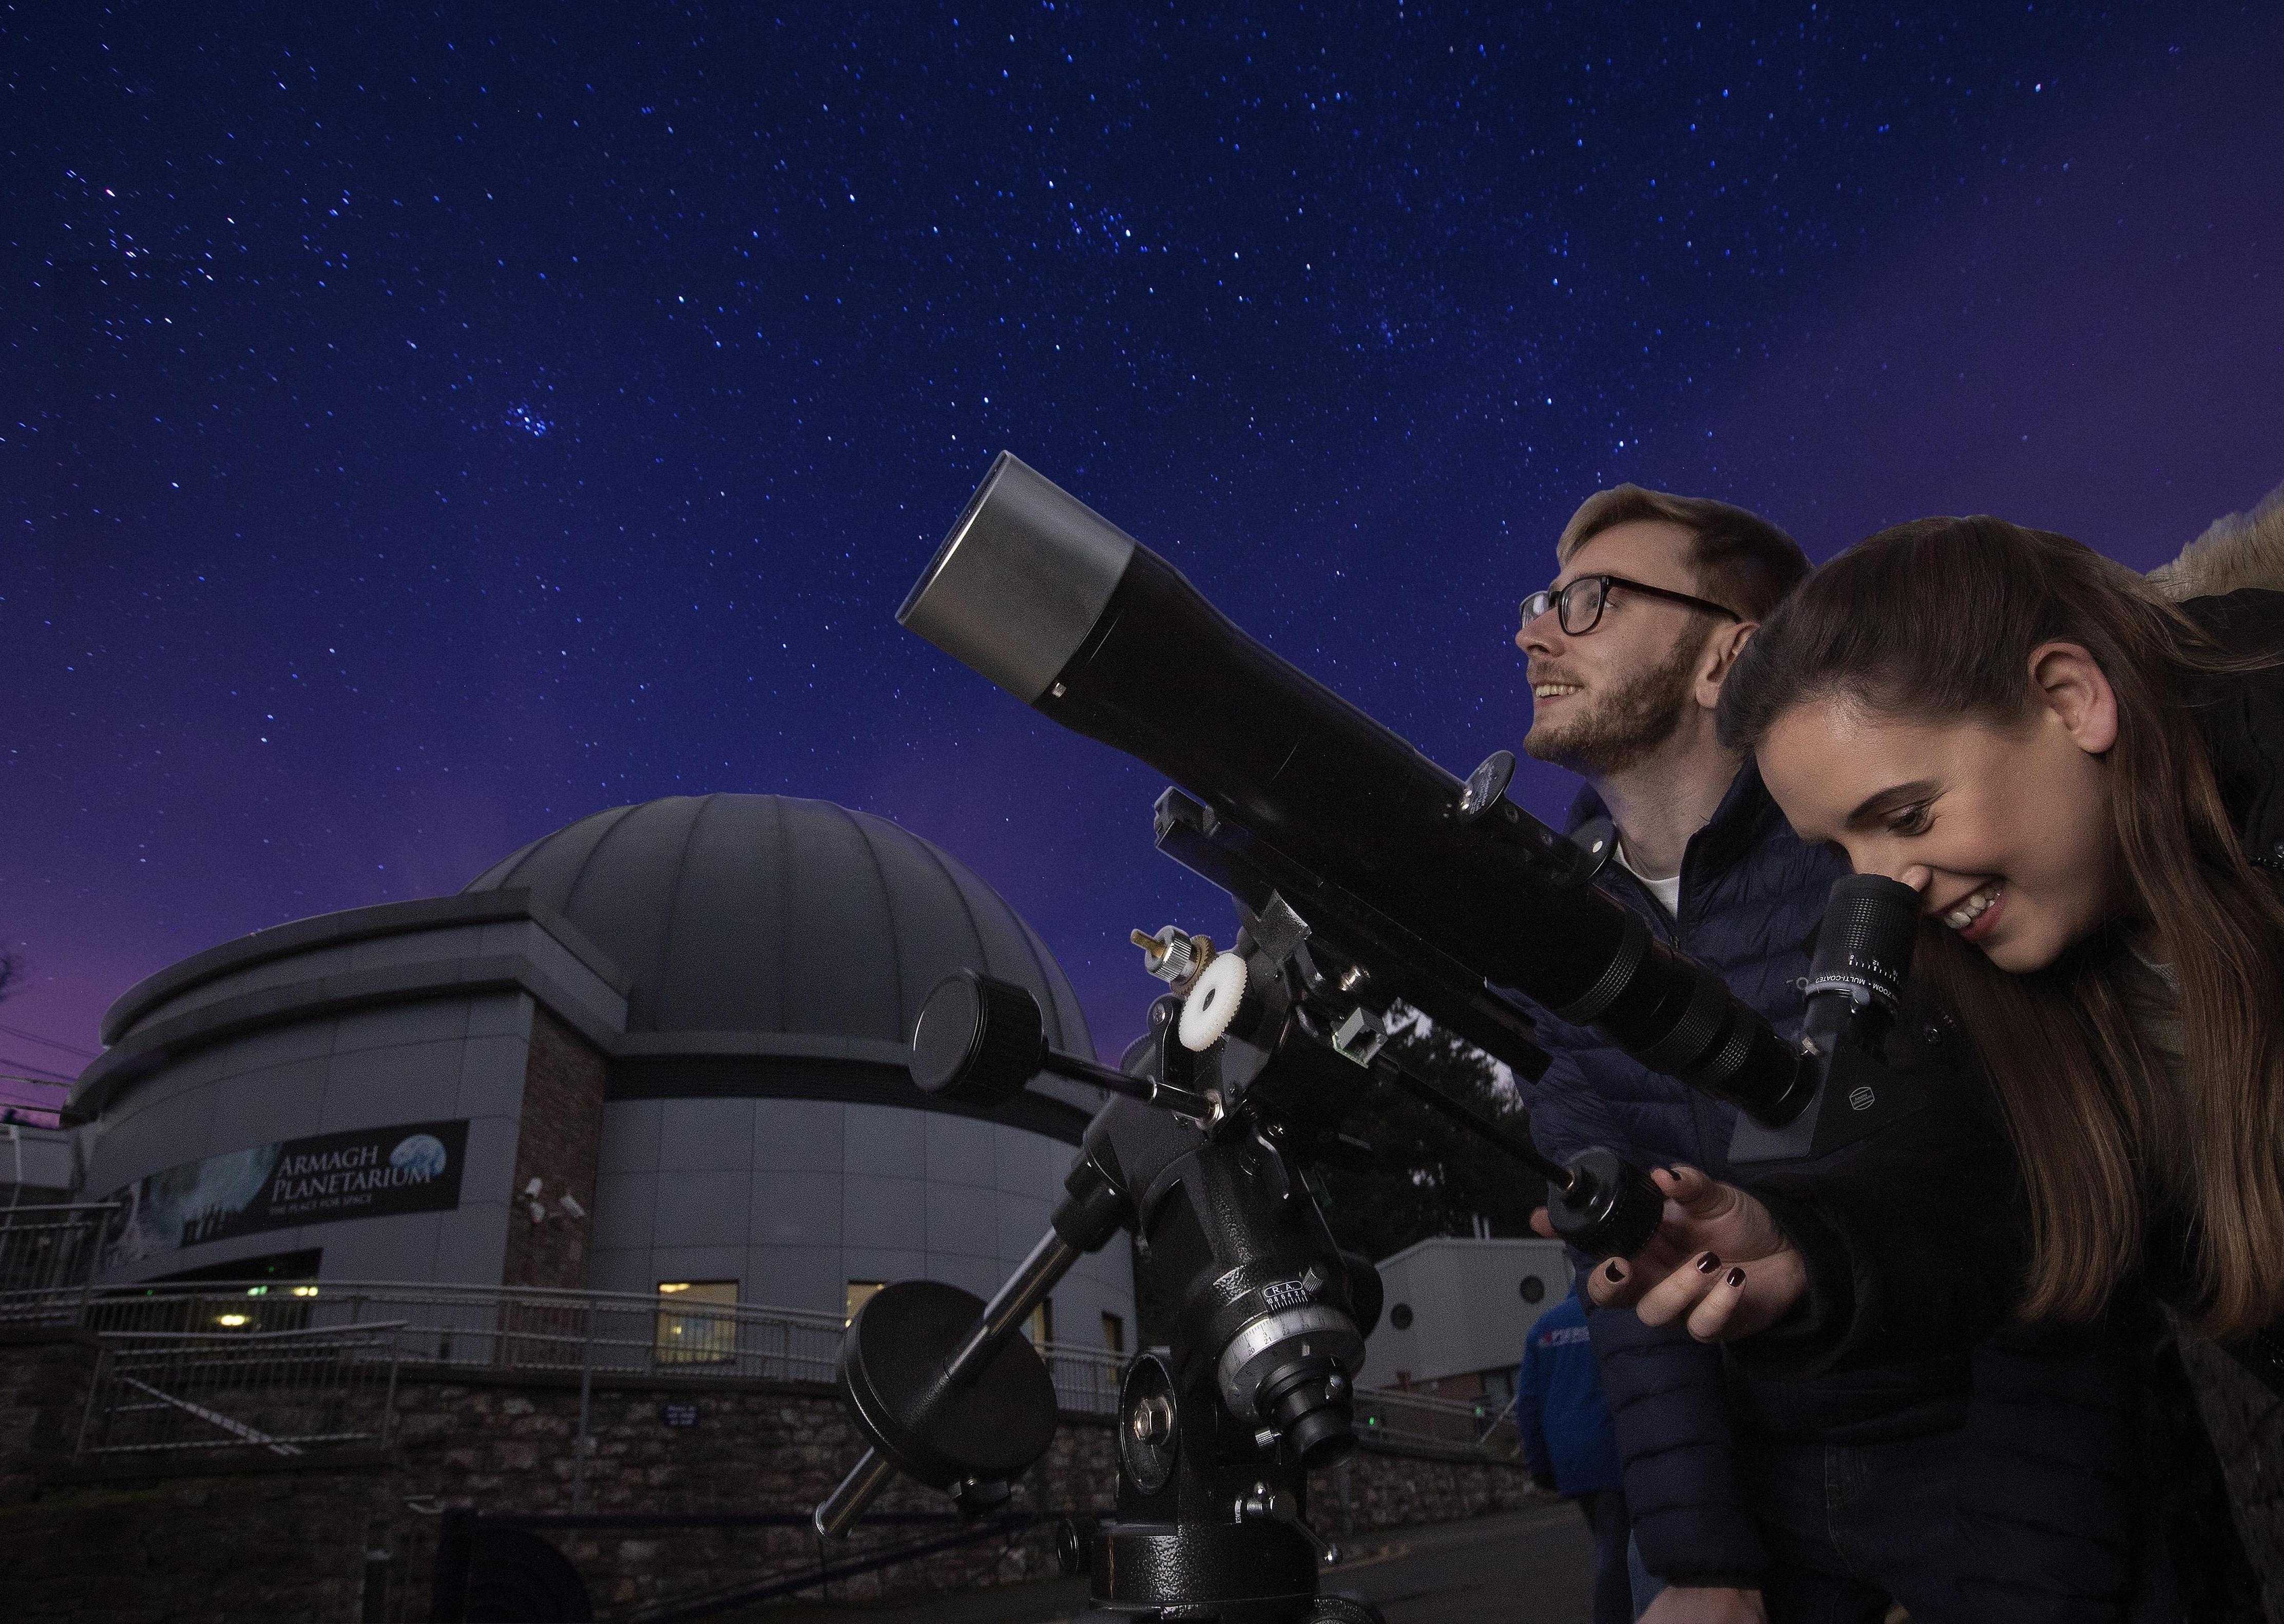 Valentine’s Day StarTracker, Armagh Planetarium, February 14
A Valentine’s Day trip to Armagh Observatory and Planetarium will show the special person in your life that you love them to the stars and back. The Observatory and Planetarium is planning a special StarTracker evening. This is an opportunity for couples to view the cosmos and even track down the Valentine’s Star, otherwise known as Betelgeuse.